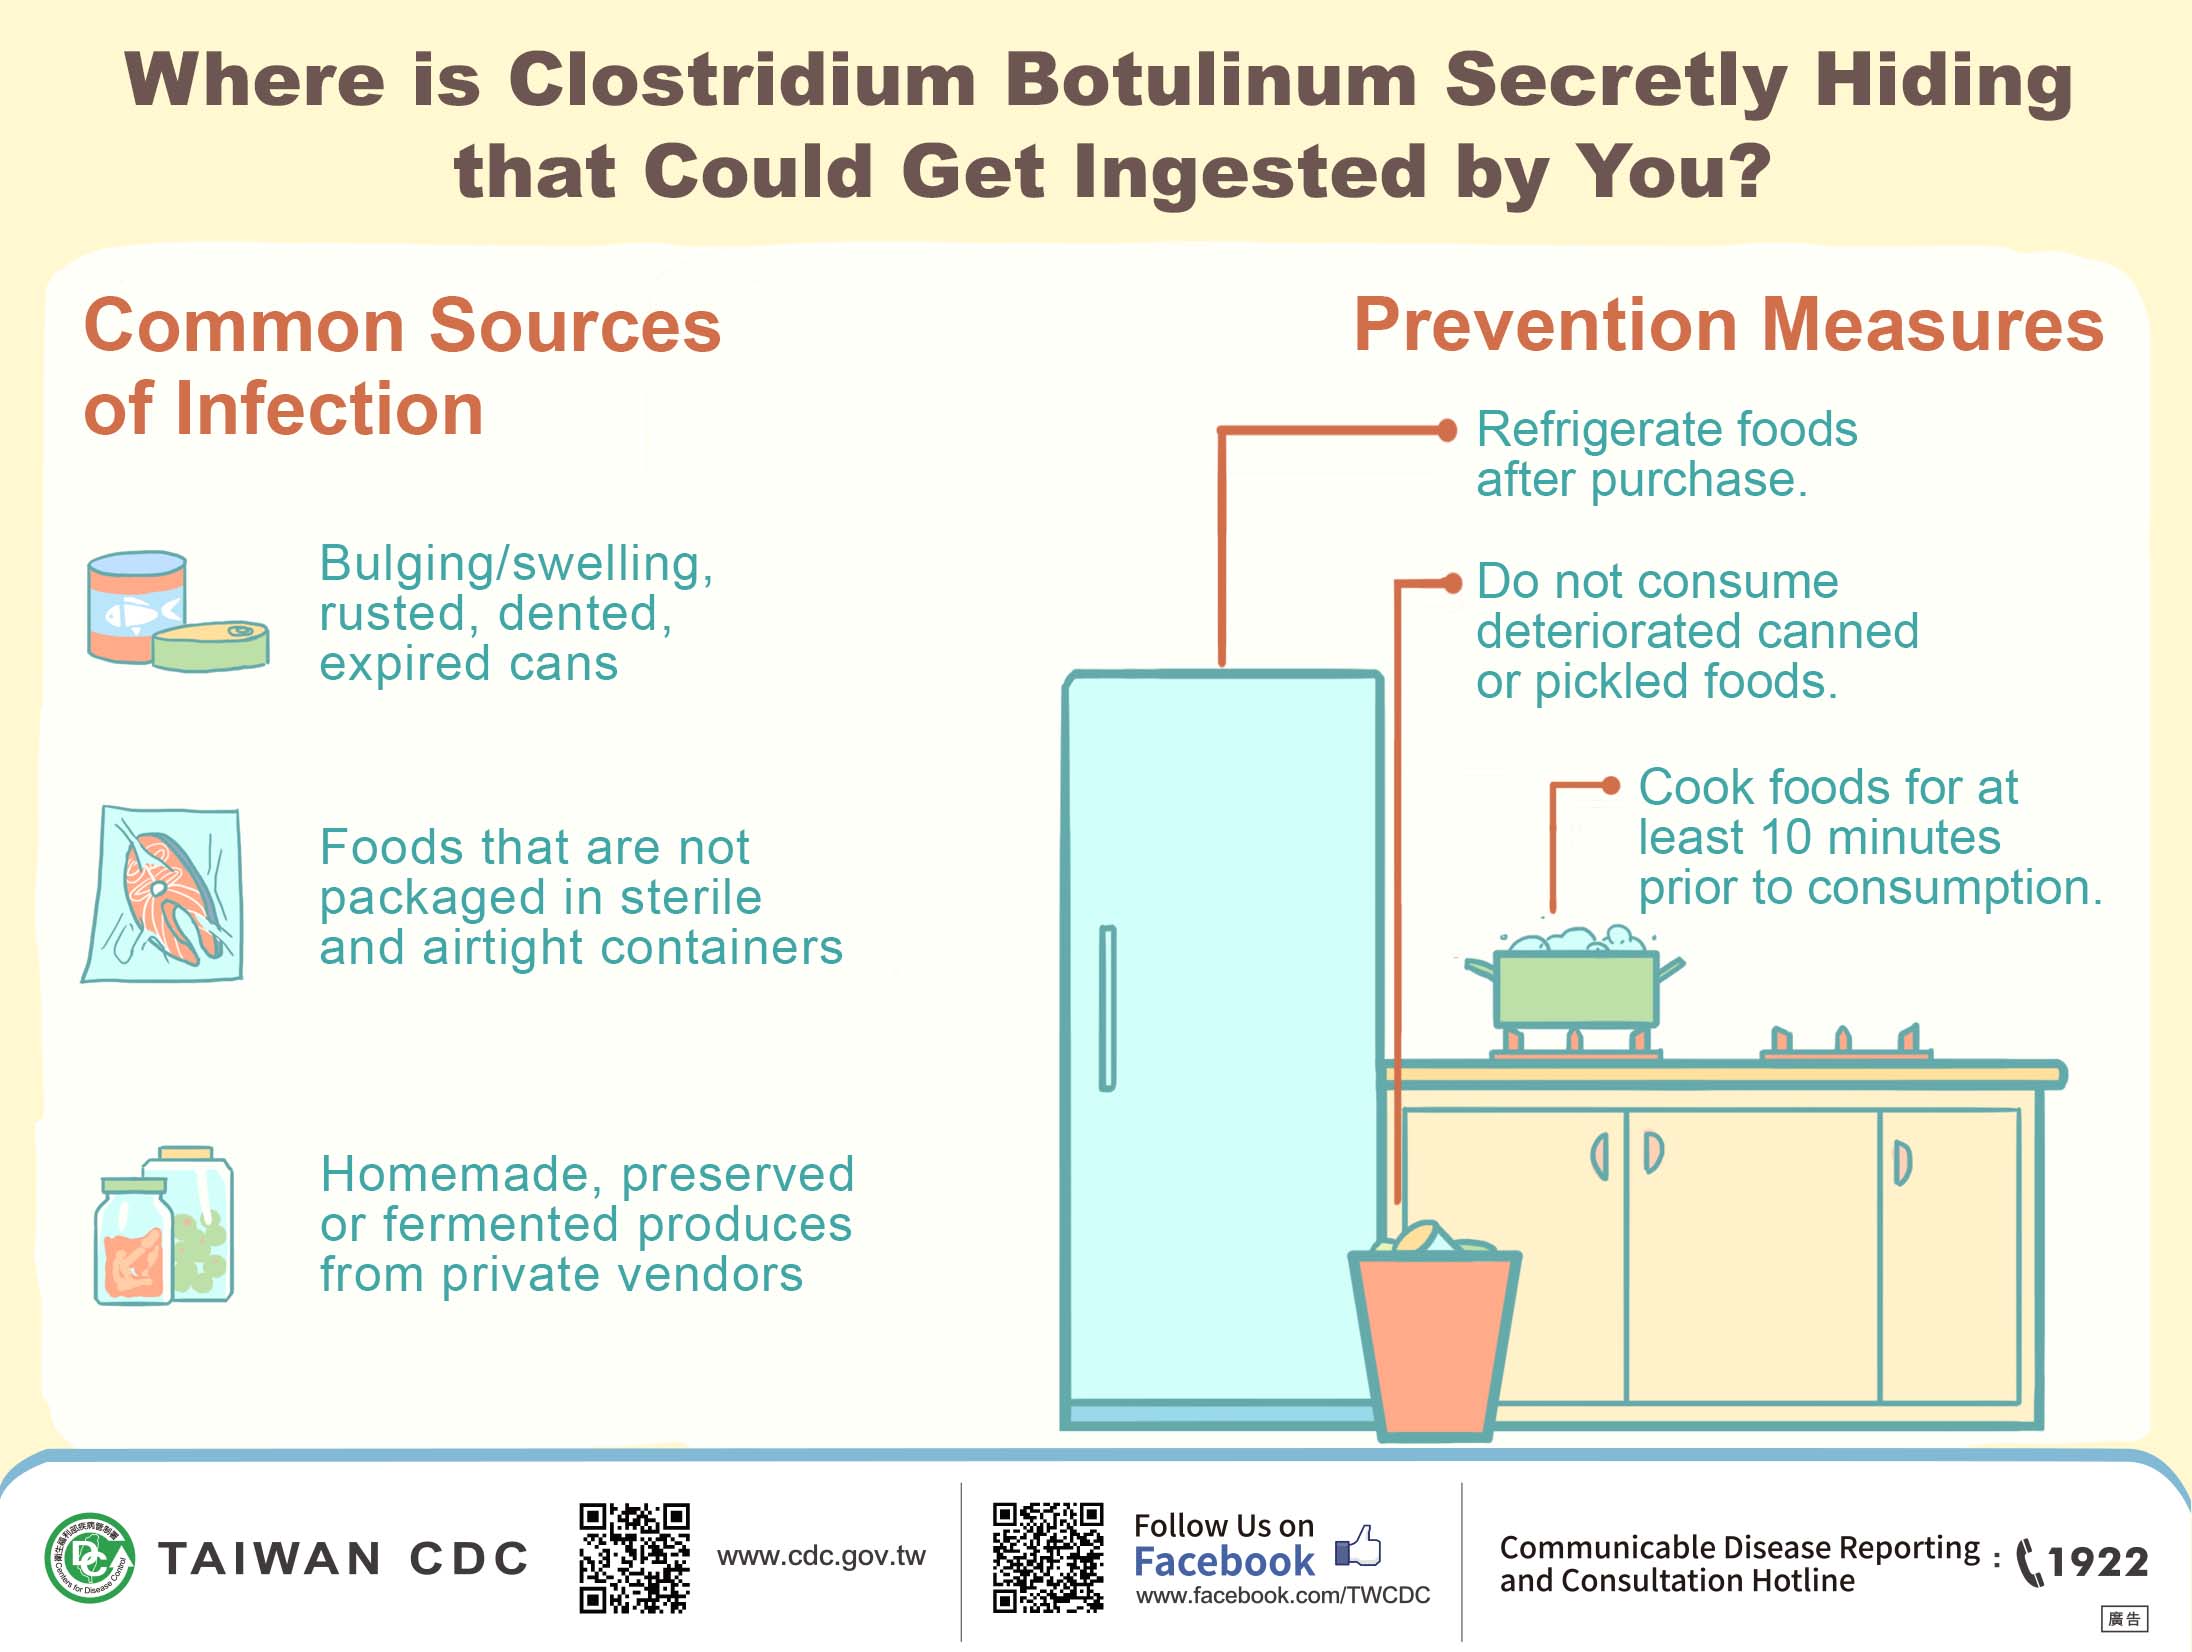 Common Sources of Infection and Prevention Measures for Clostridium Botulinum.jpg